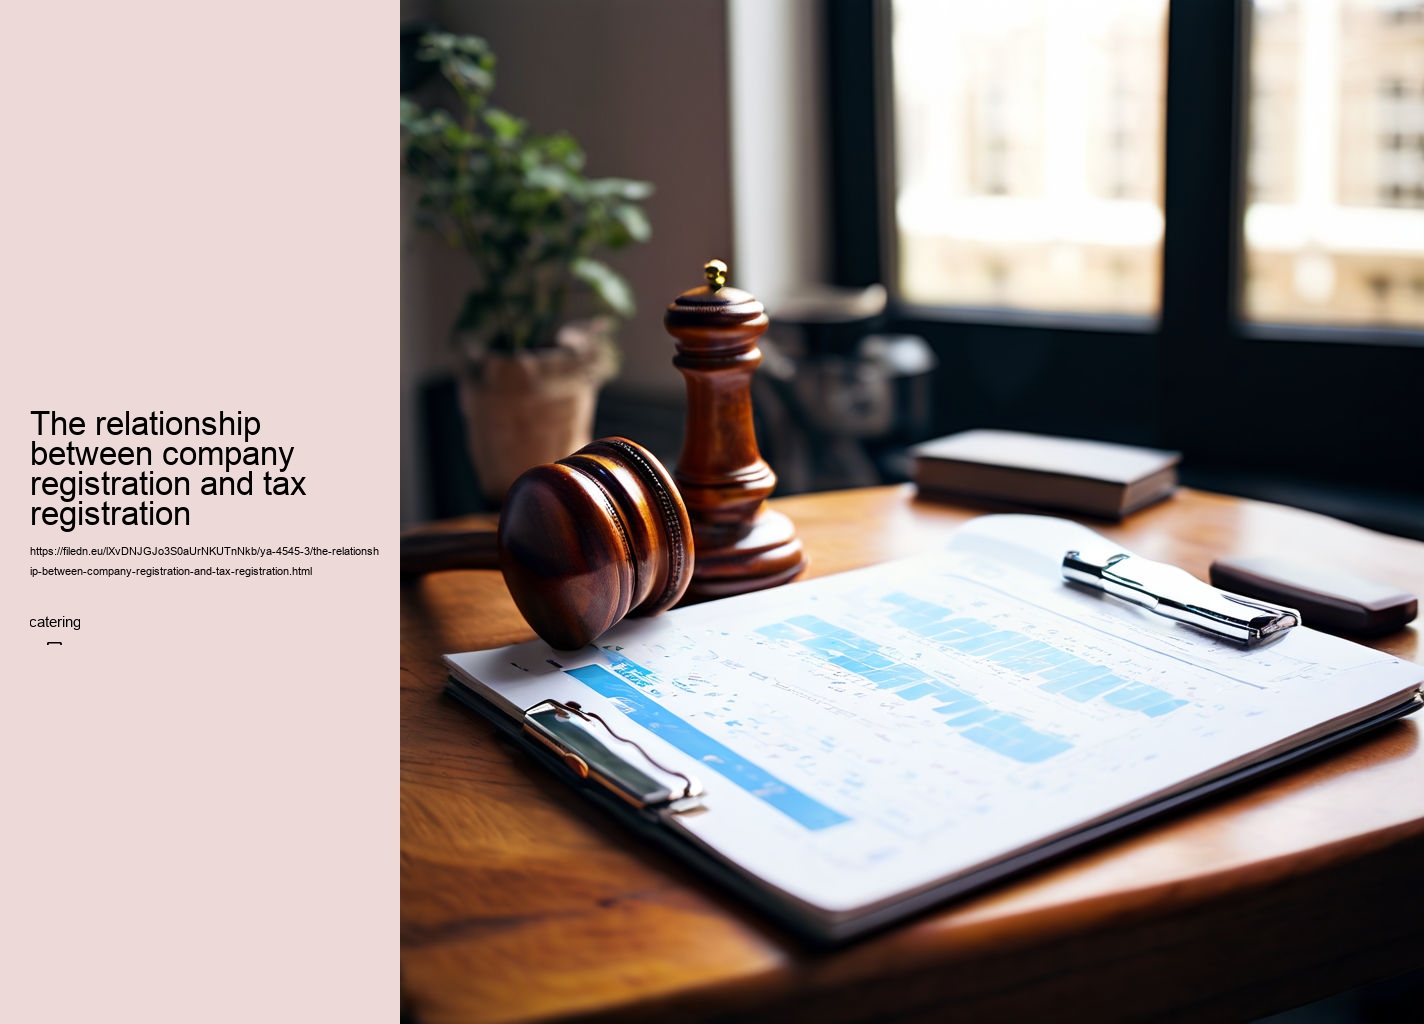 The relationship between company registration and tax registration